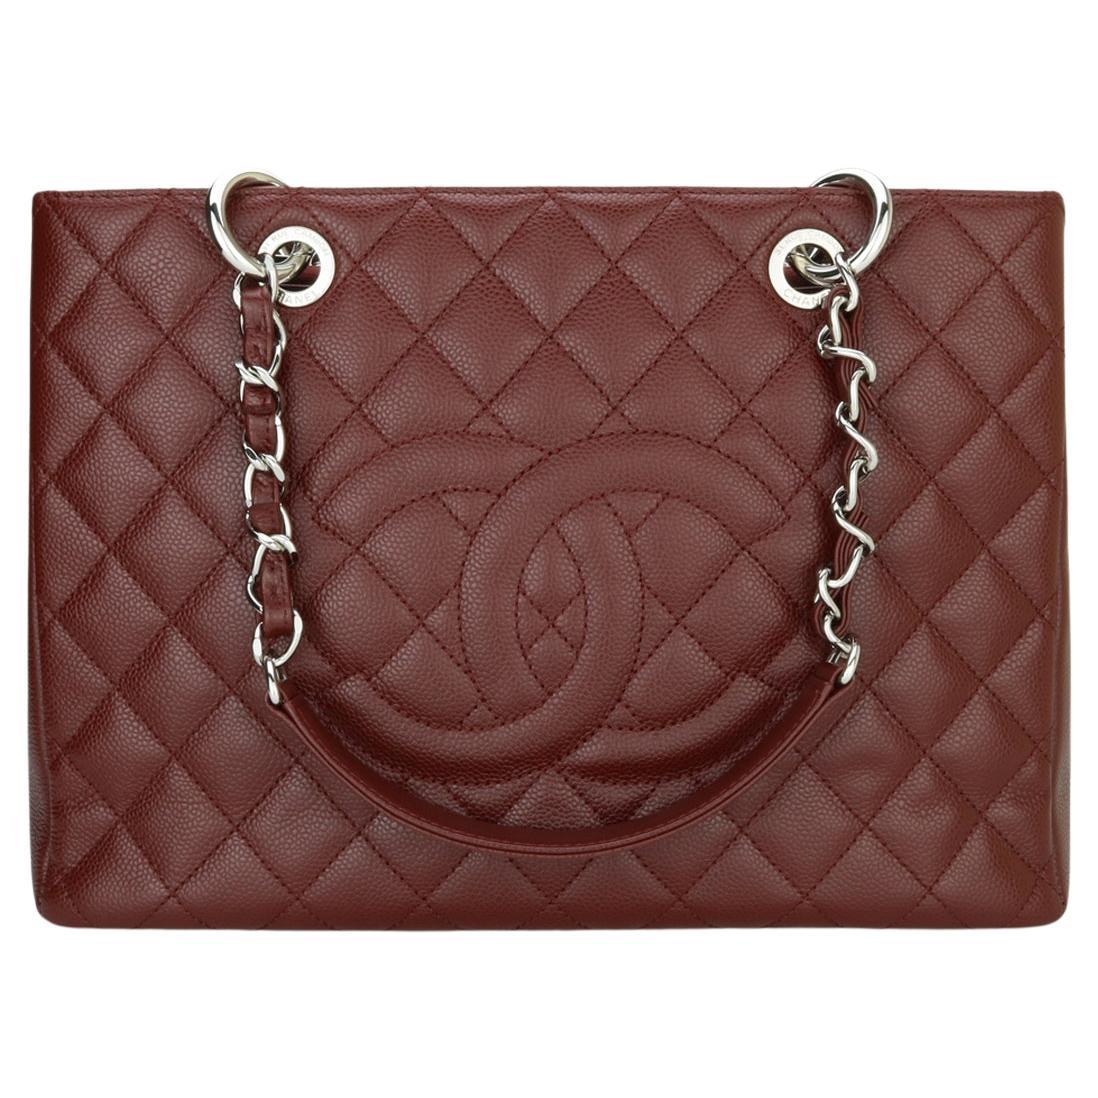 CHANEL Grand Shopping Tote (GST) Bag Burgundy Caviar with Silver Hardware 2014